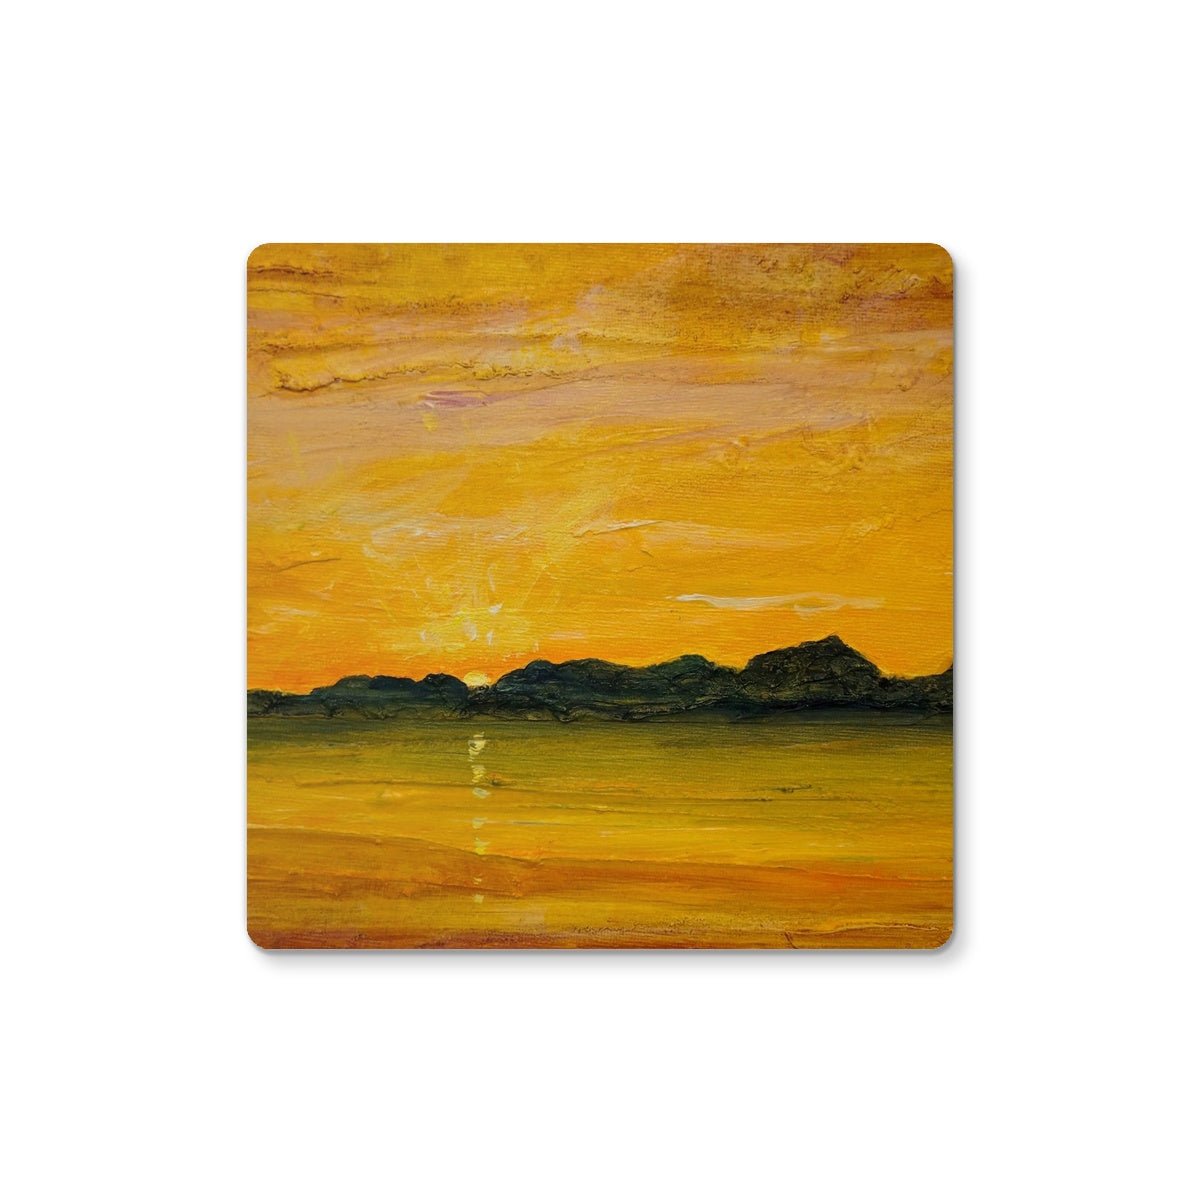 Jura Sunset Art Gifts Coaster-Coasters-Hebridean Islands Art Gallery-2 Coasters-Paintings, Prints, Homeware, Art Gifts From Scotland By Scottish Artist Kevin Hunter